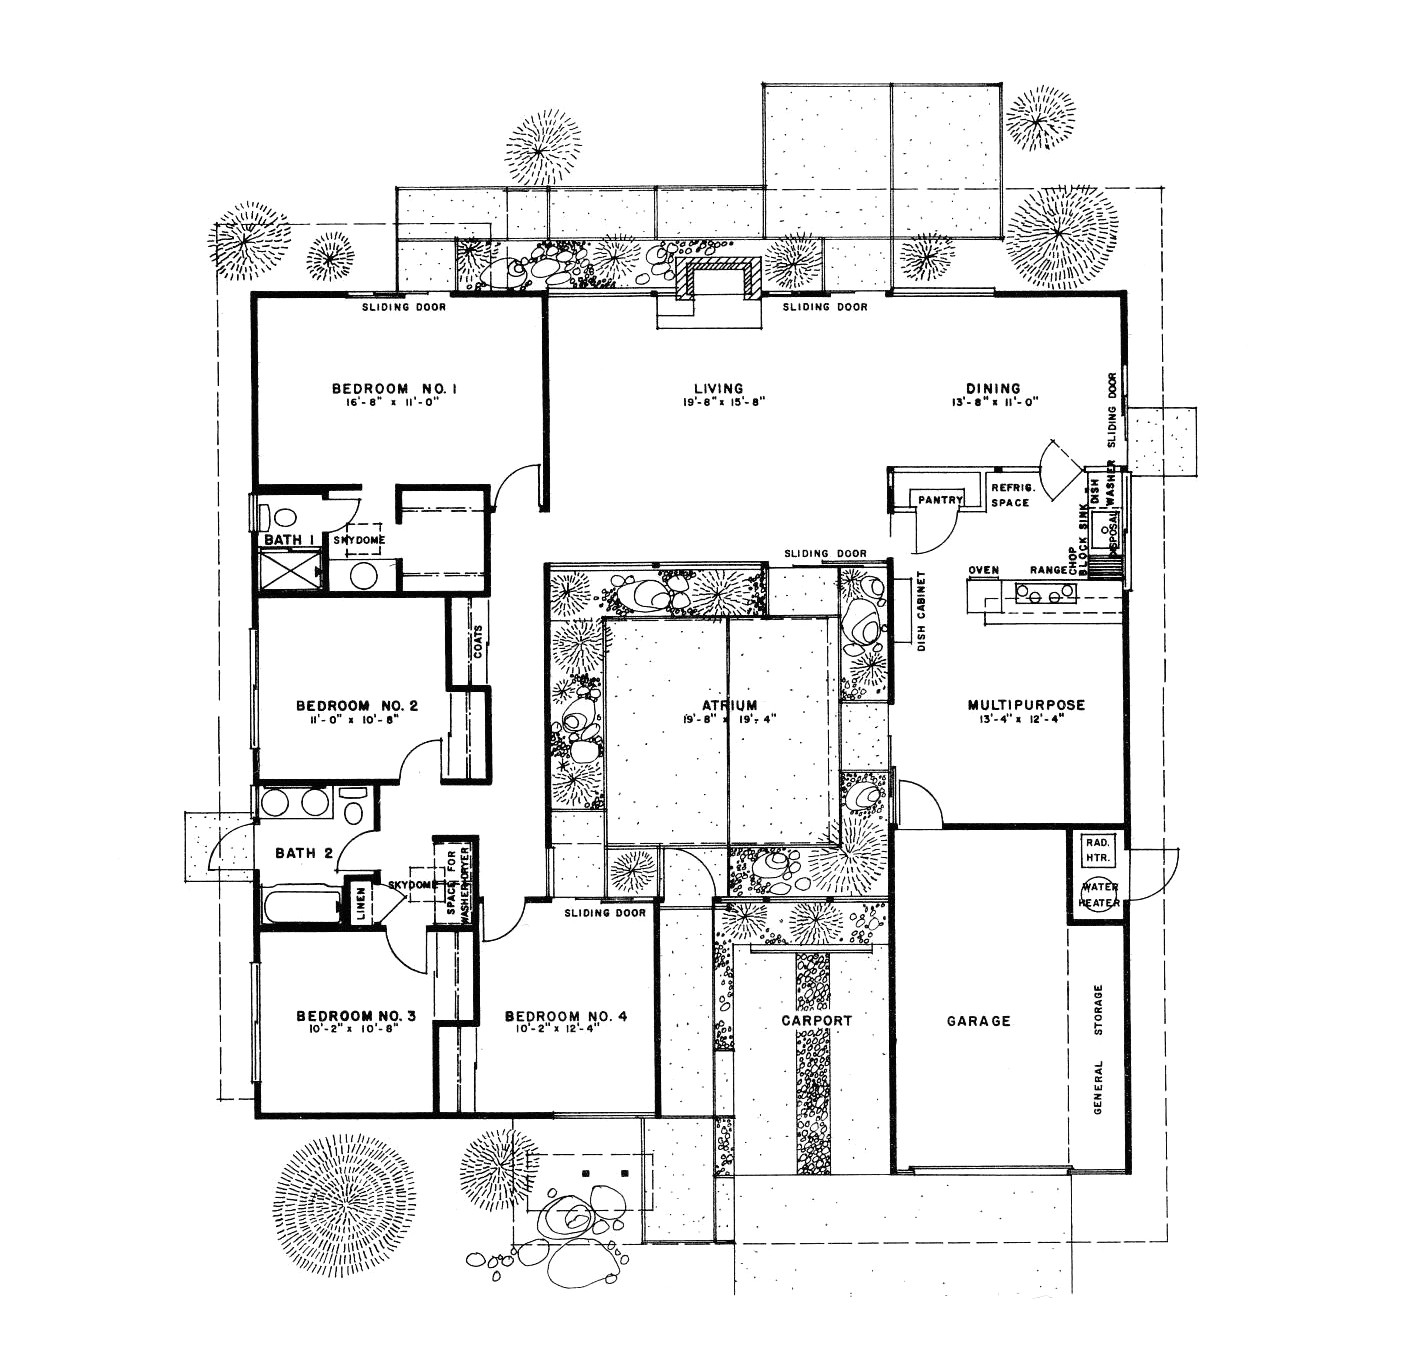 geek out time our floorplan